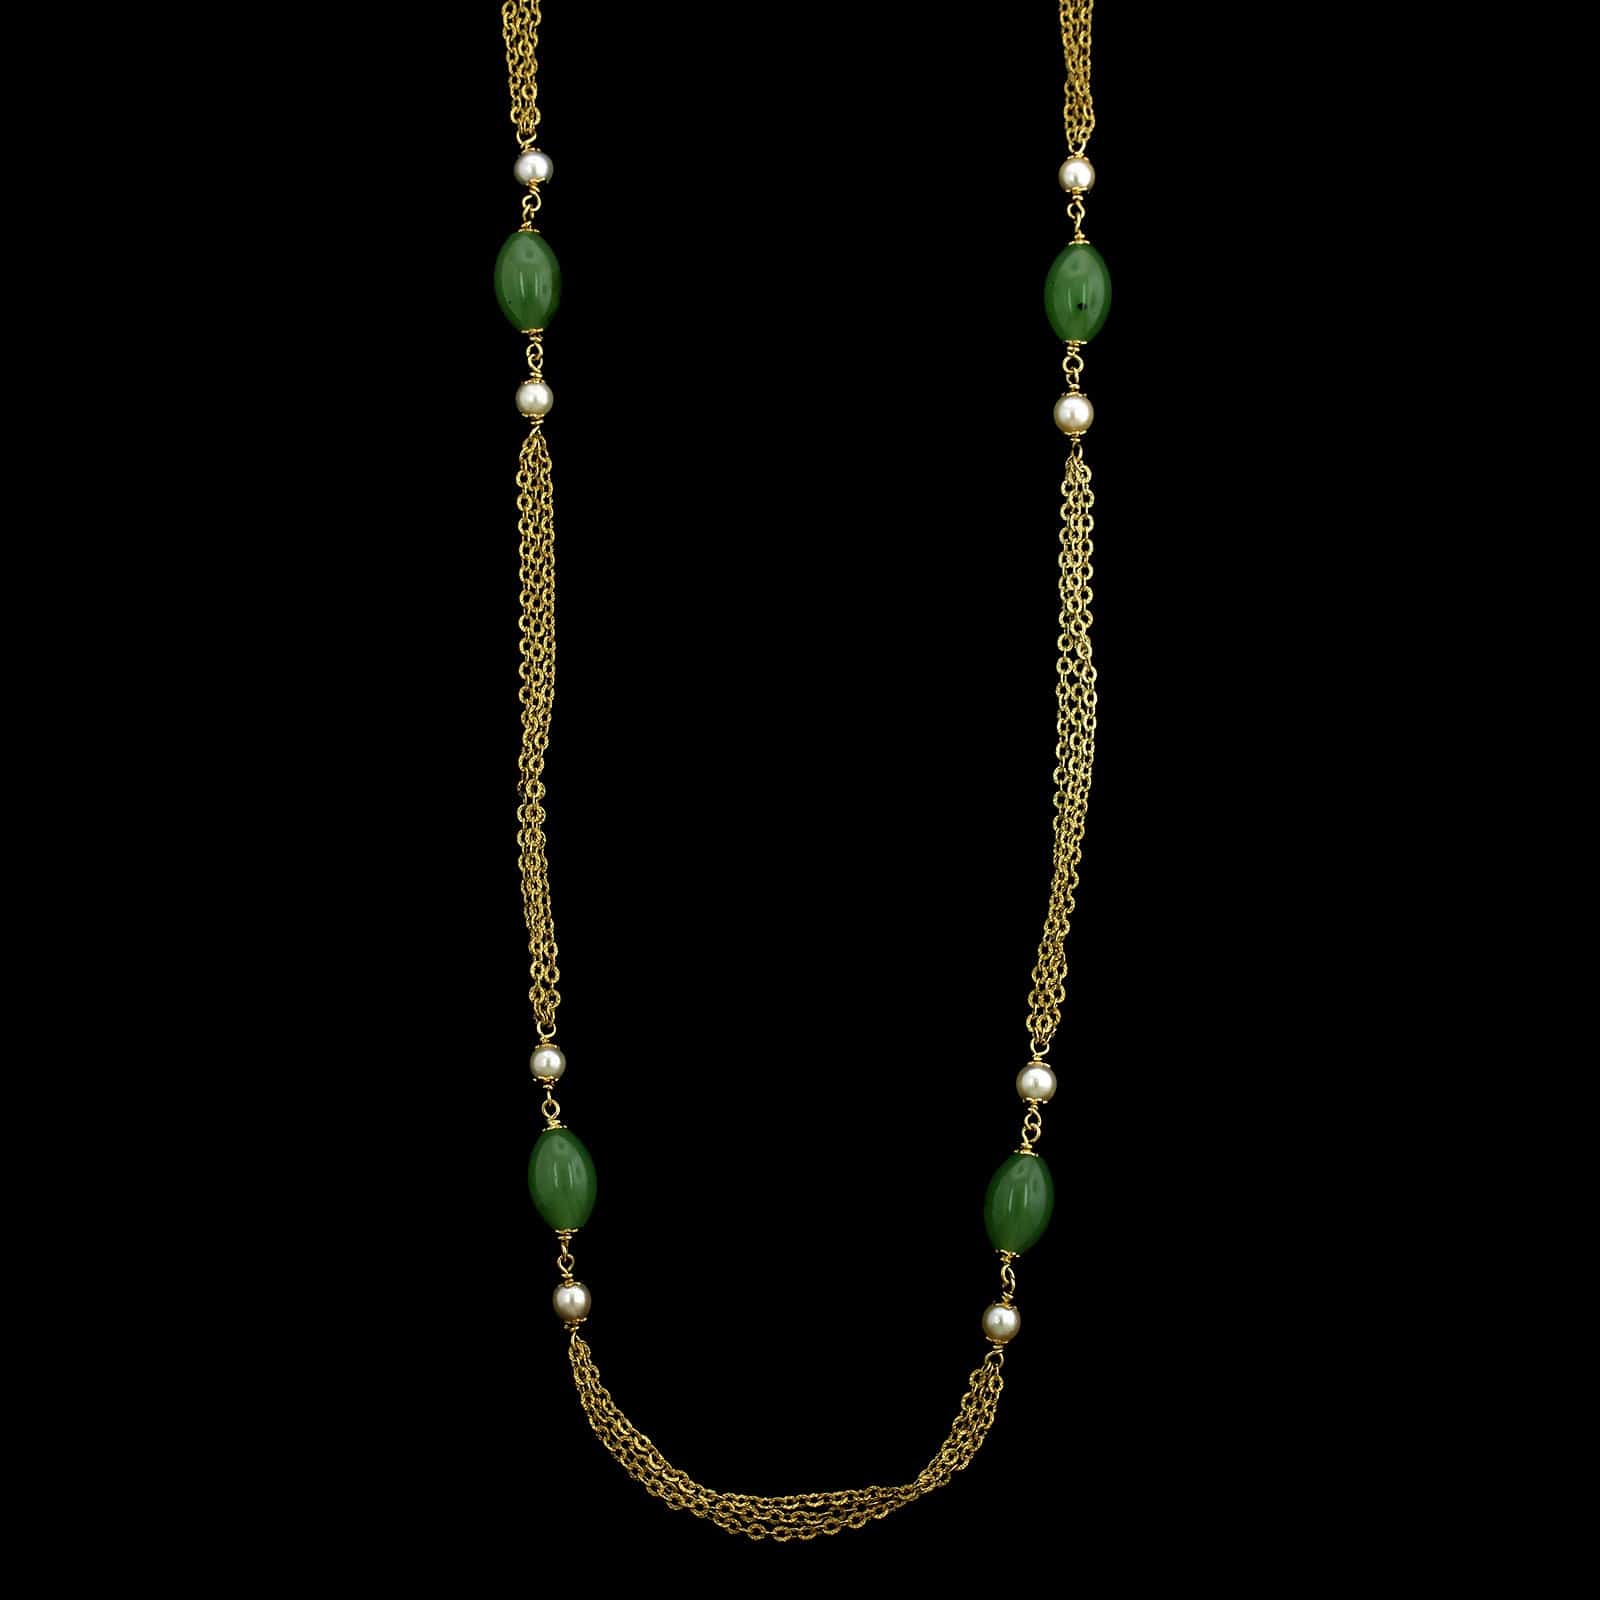 18K Yellow Gold Estate Nephrite Jade and Cultured Pearls Necklace